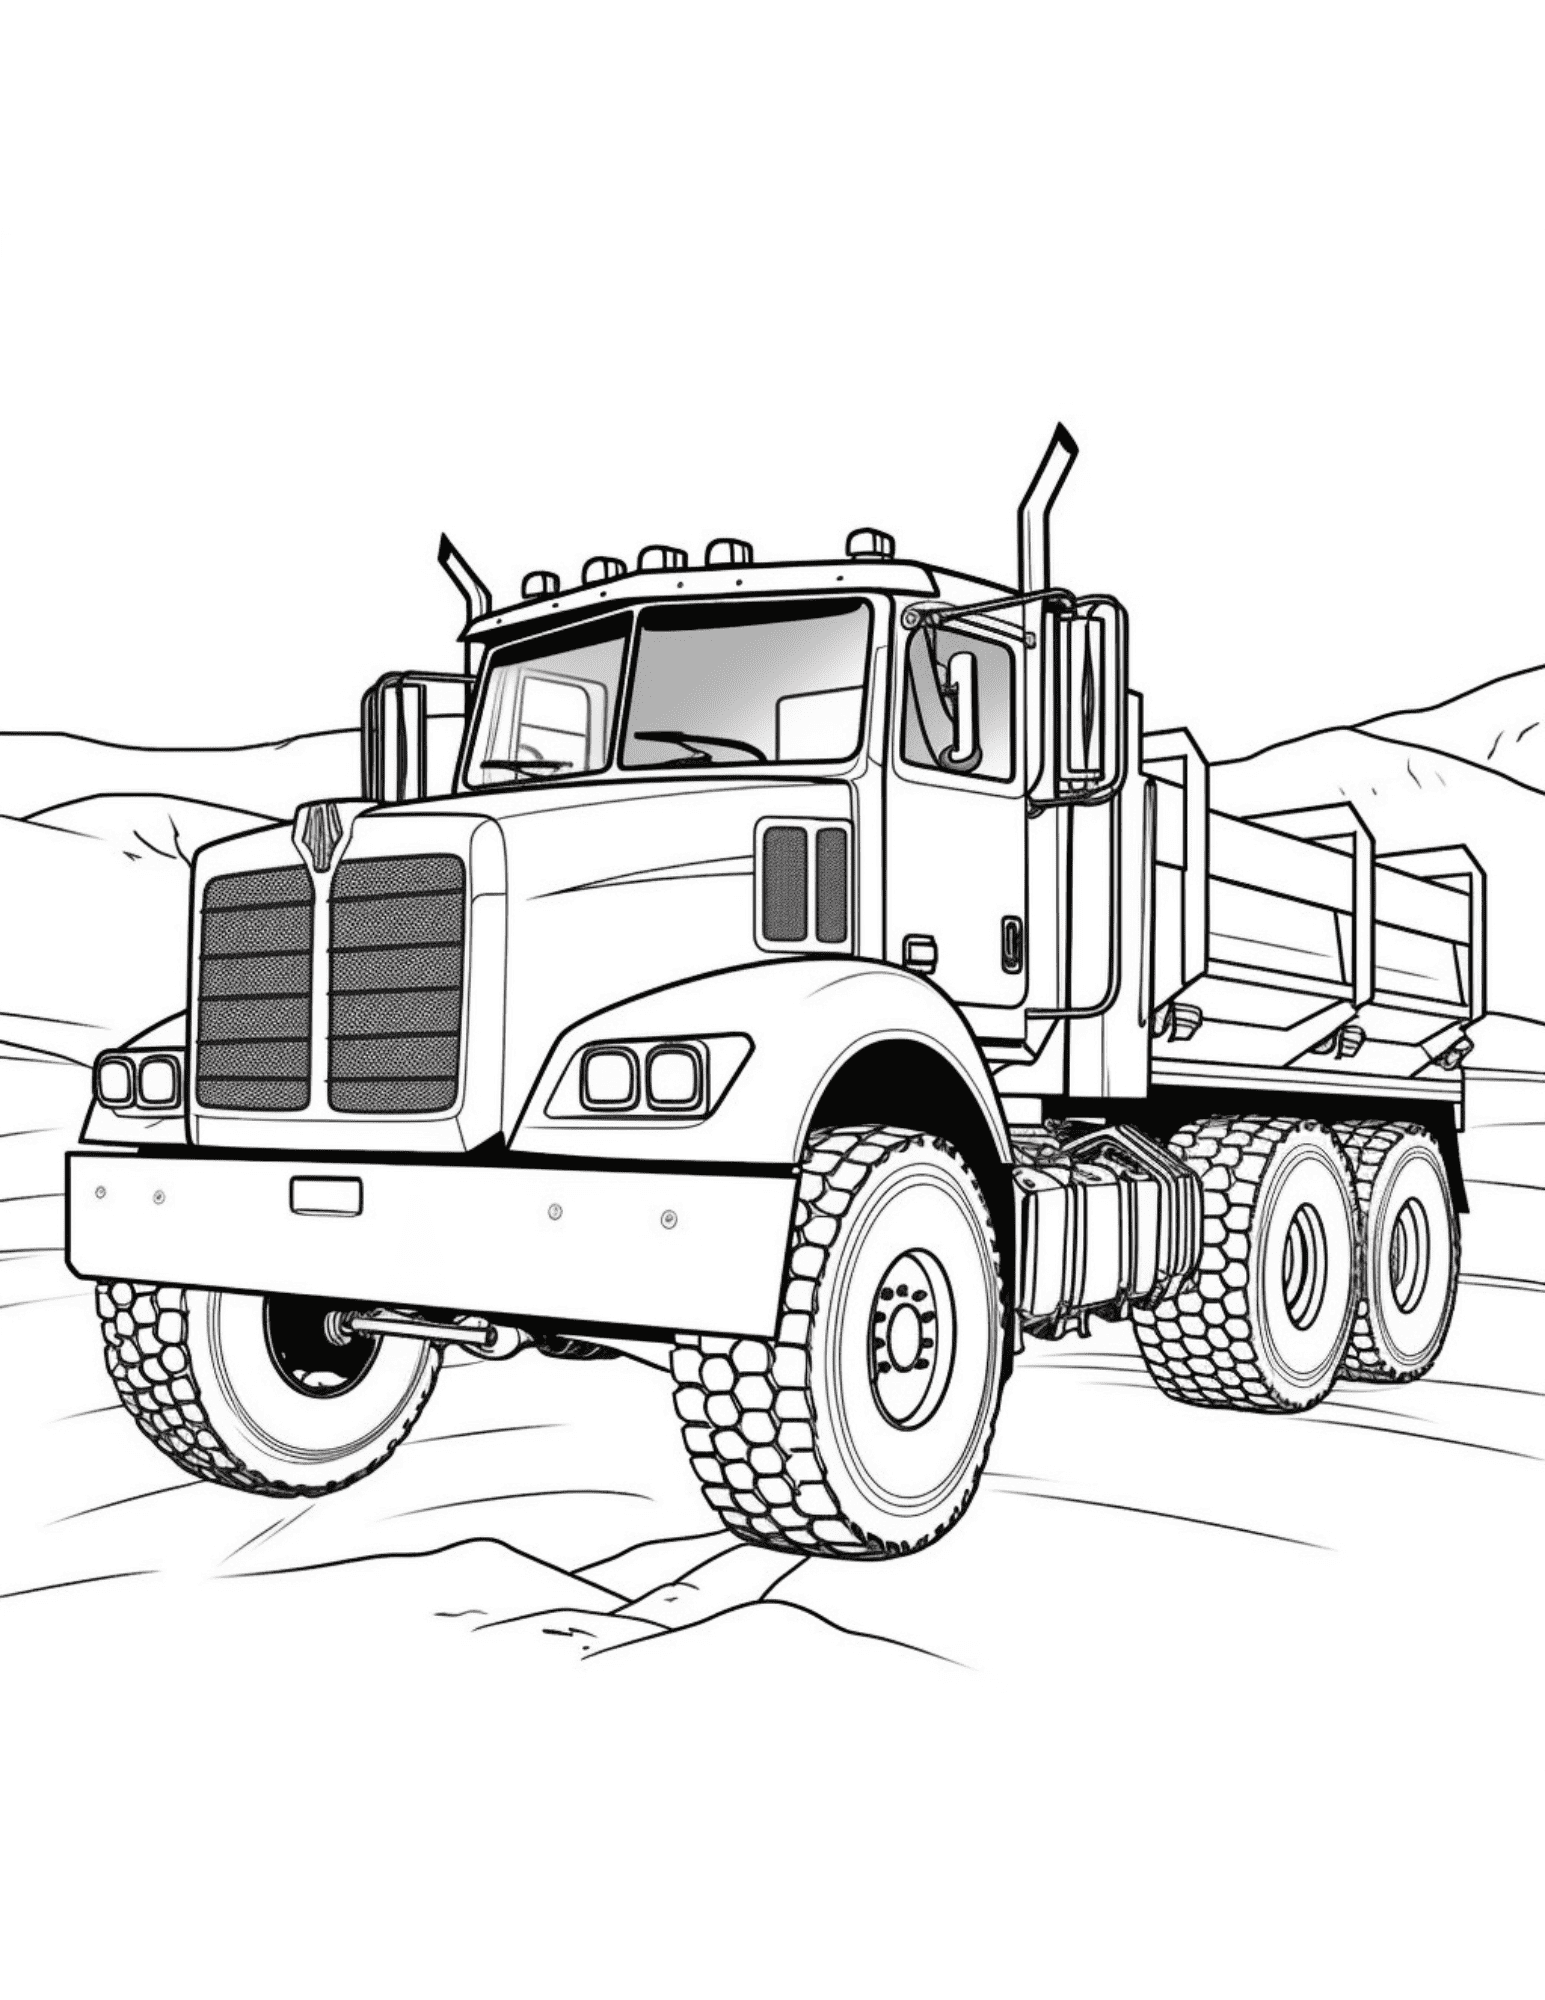 Construction coloring book page